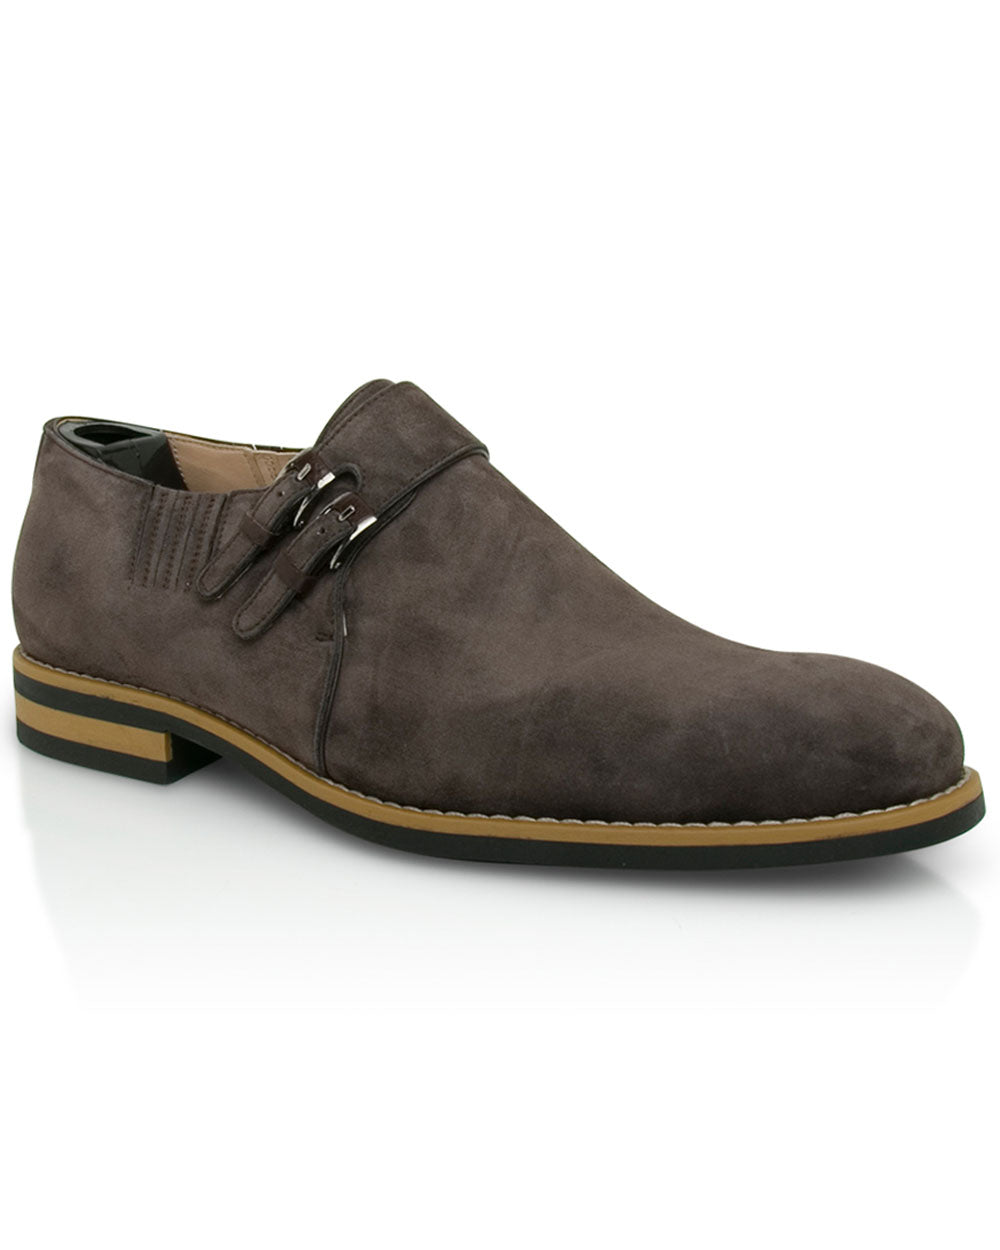 Monaco Suede Double Monk Loafer in Taupe